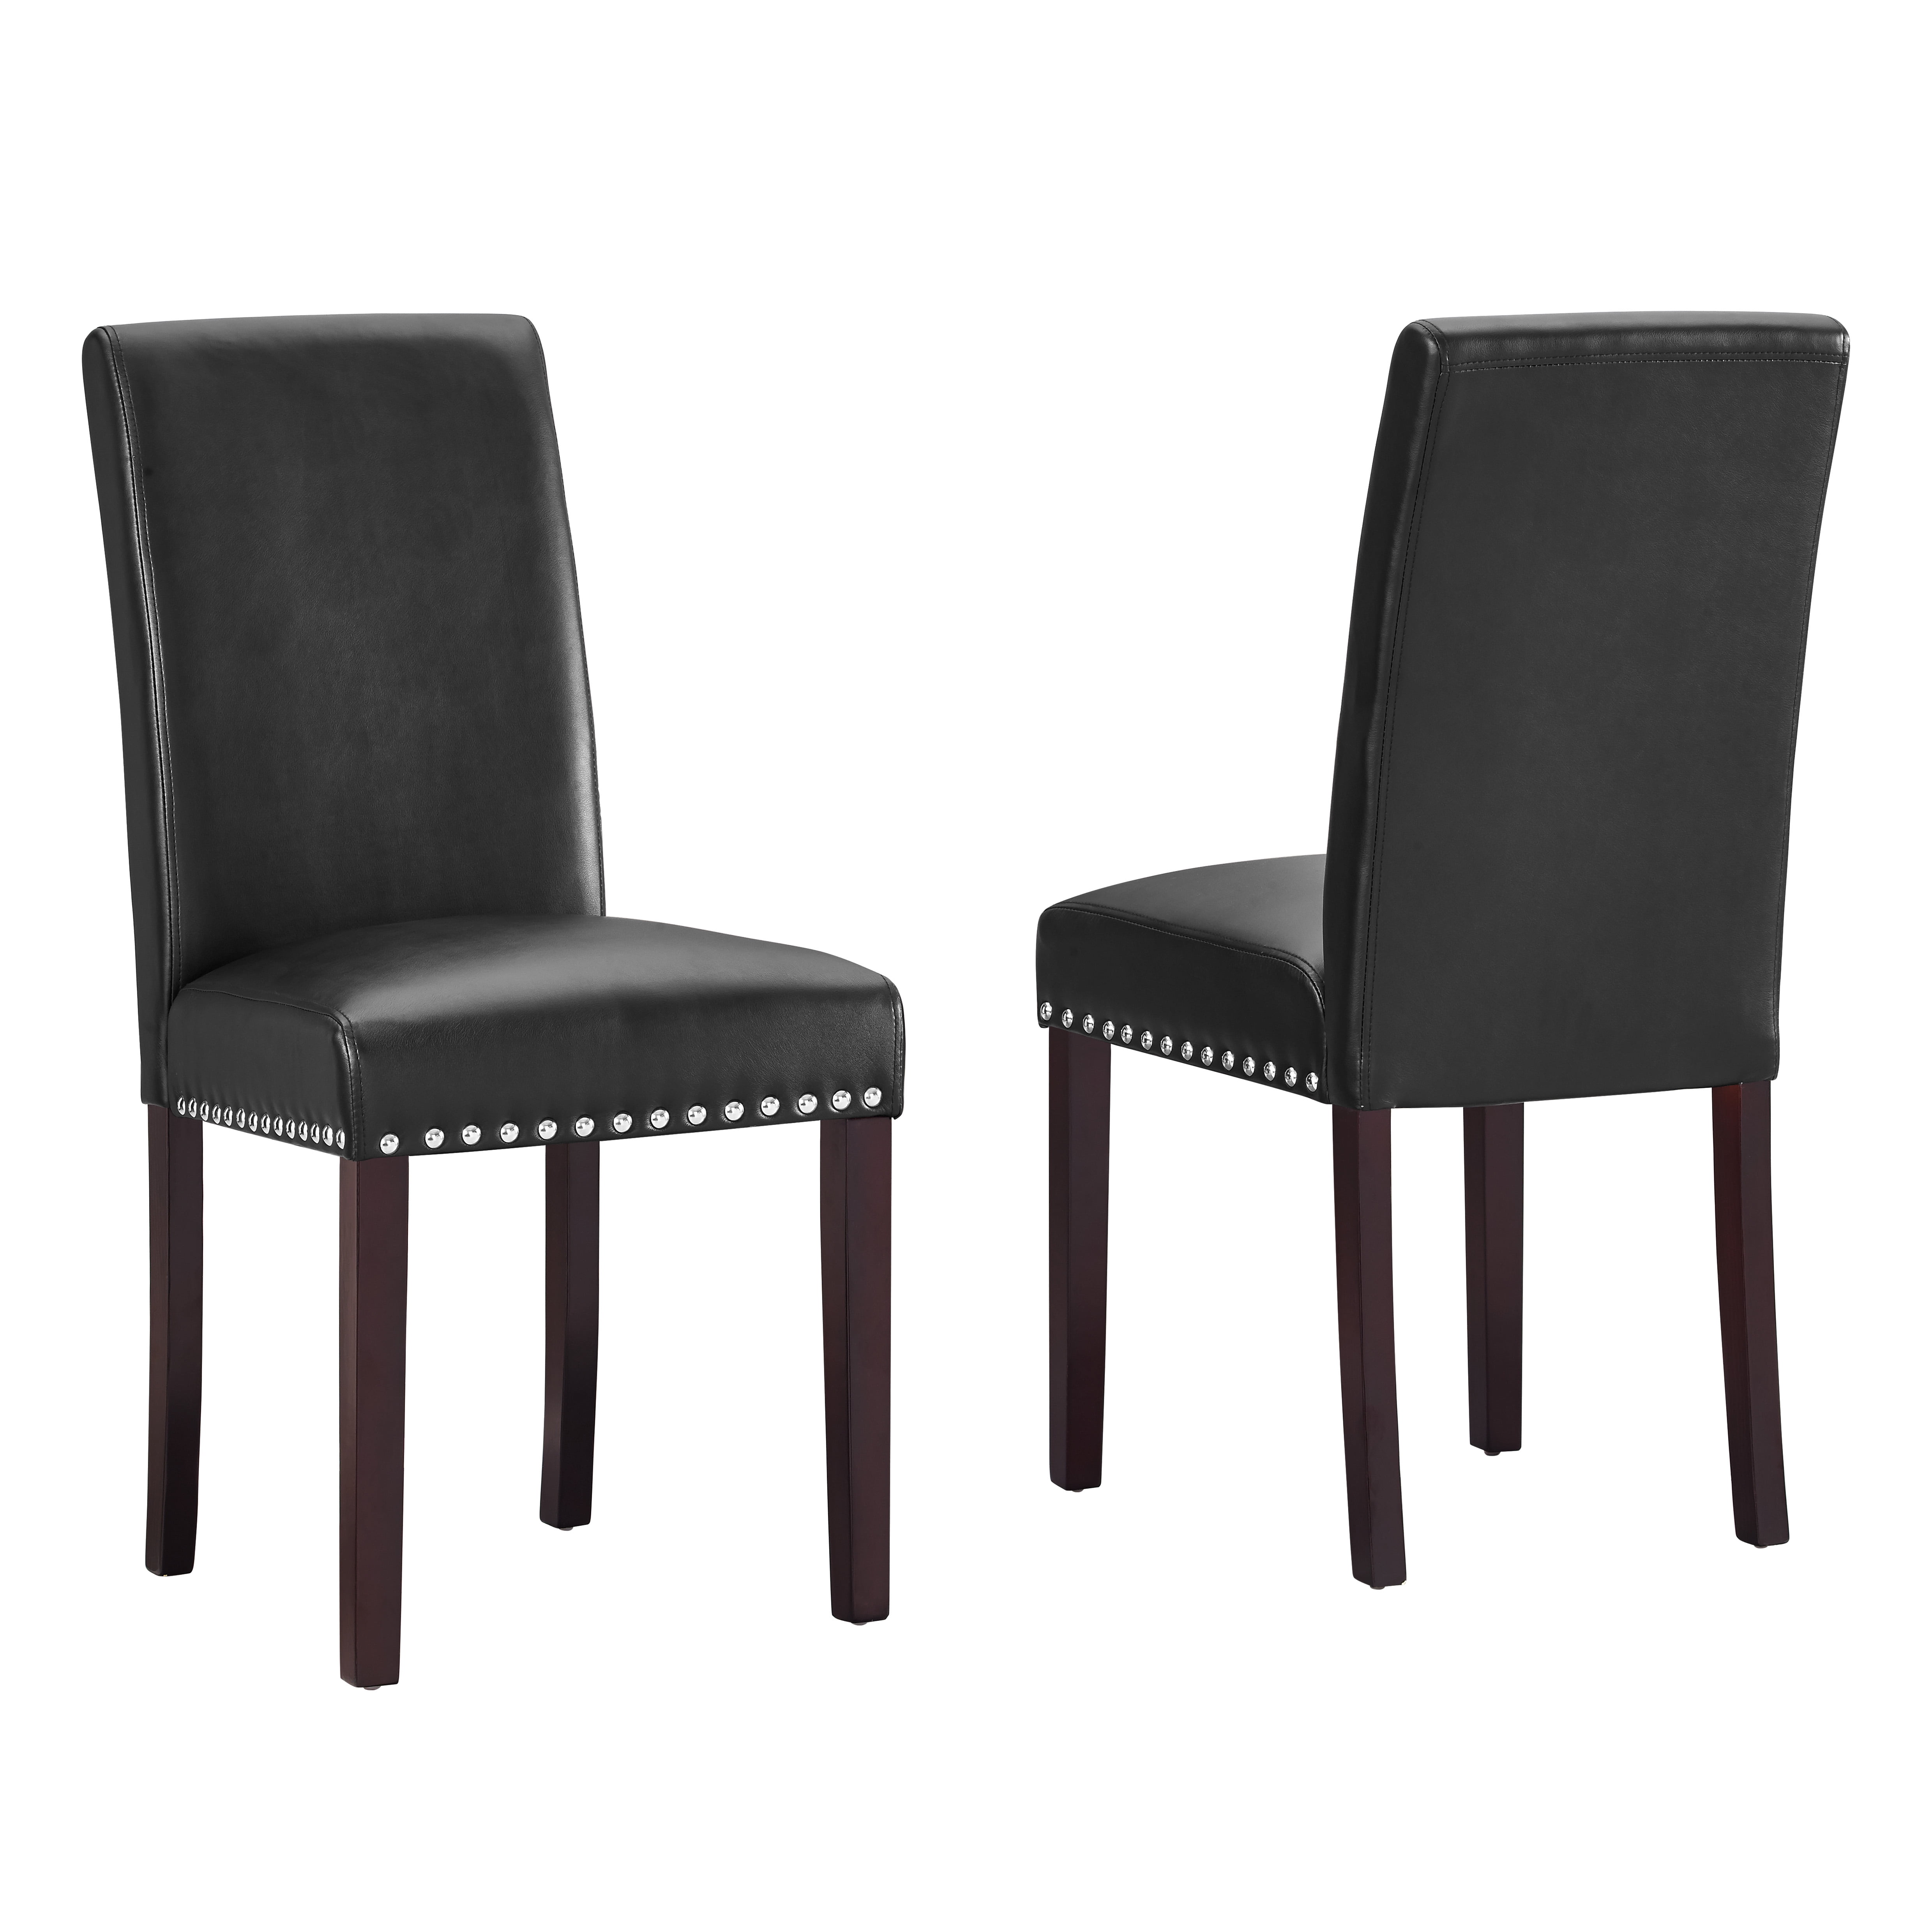 Dhi Nice Nail Head Faux Leather Dining, Nailhead Leather Dining Room Chairs